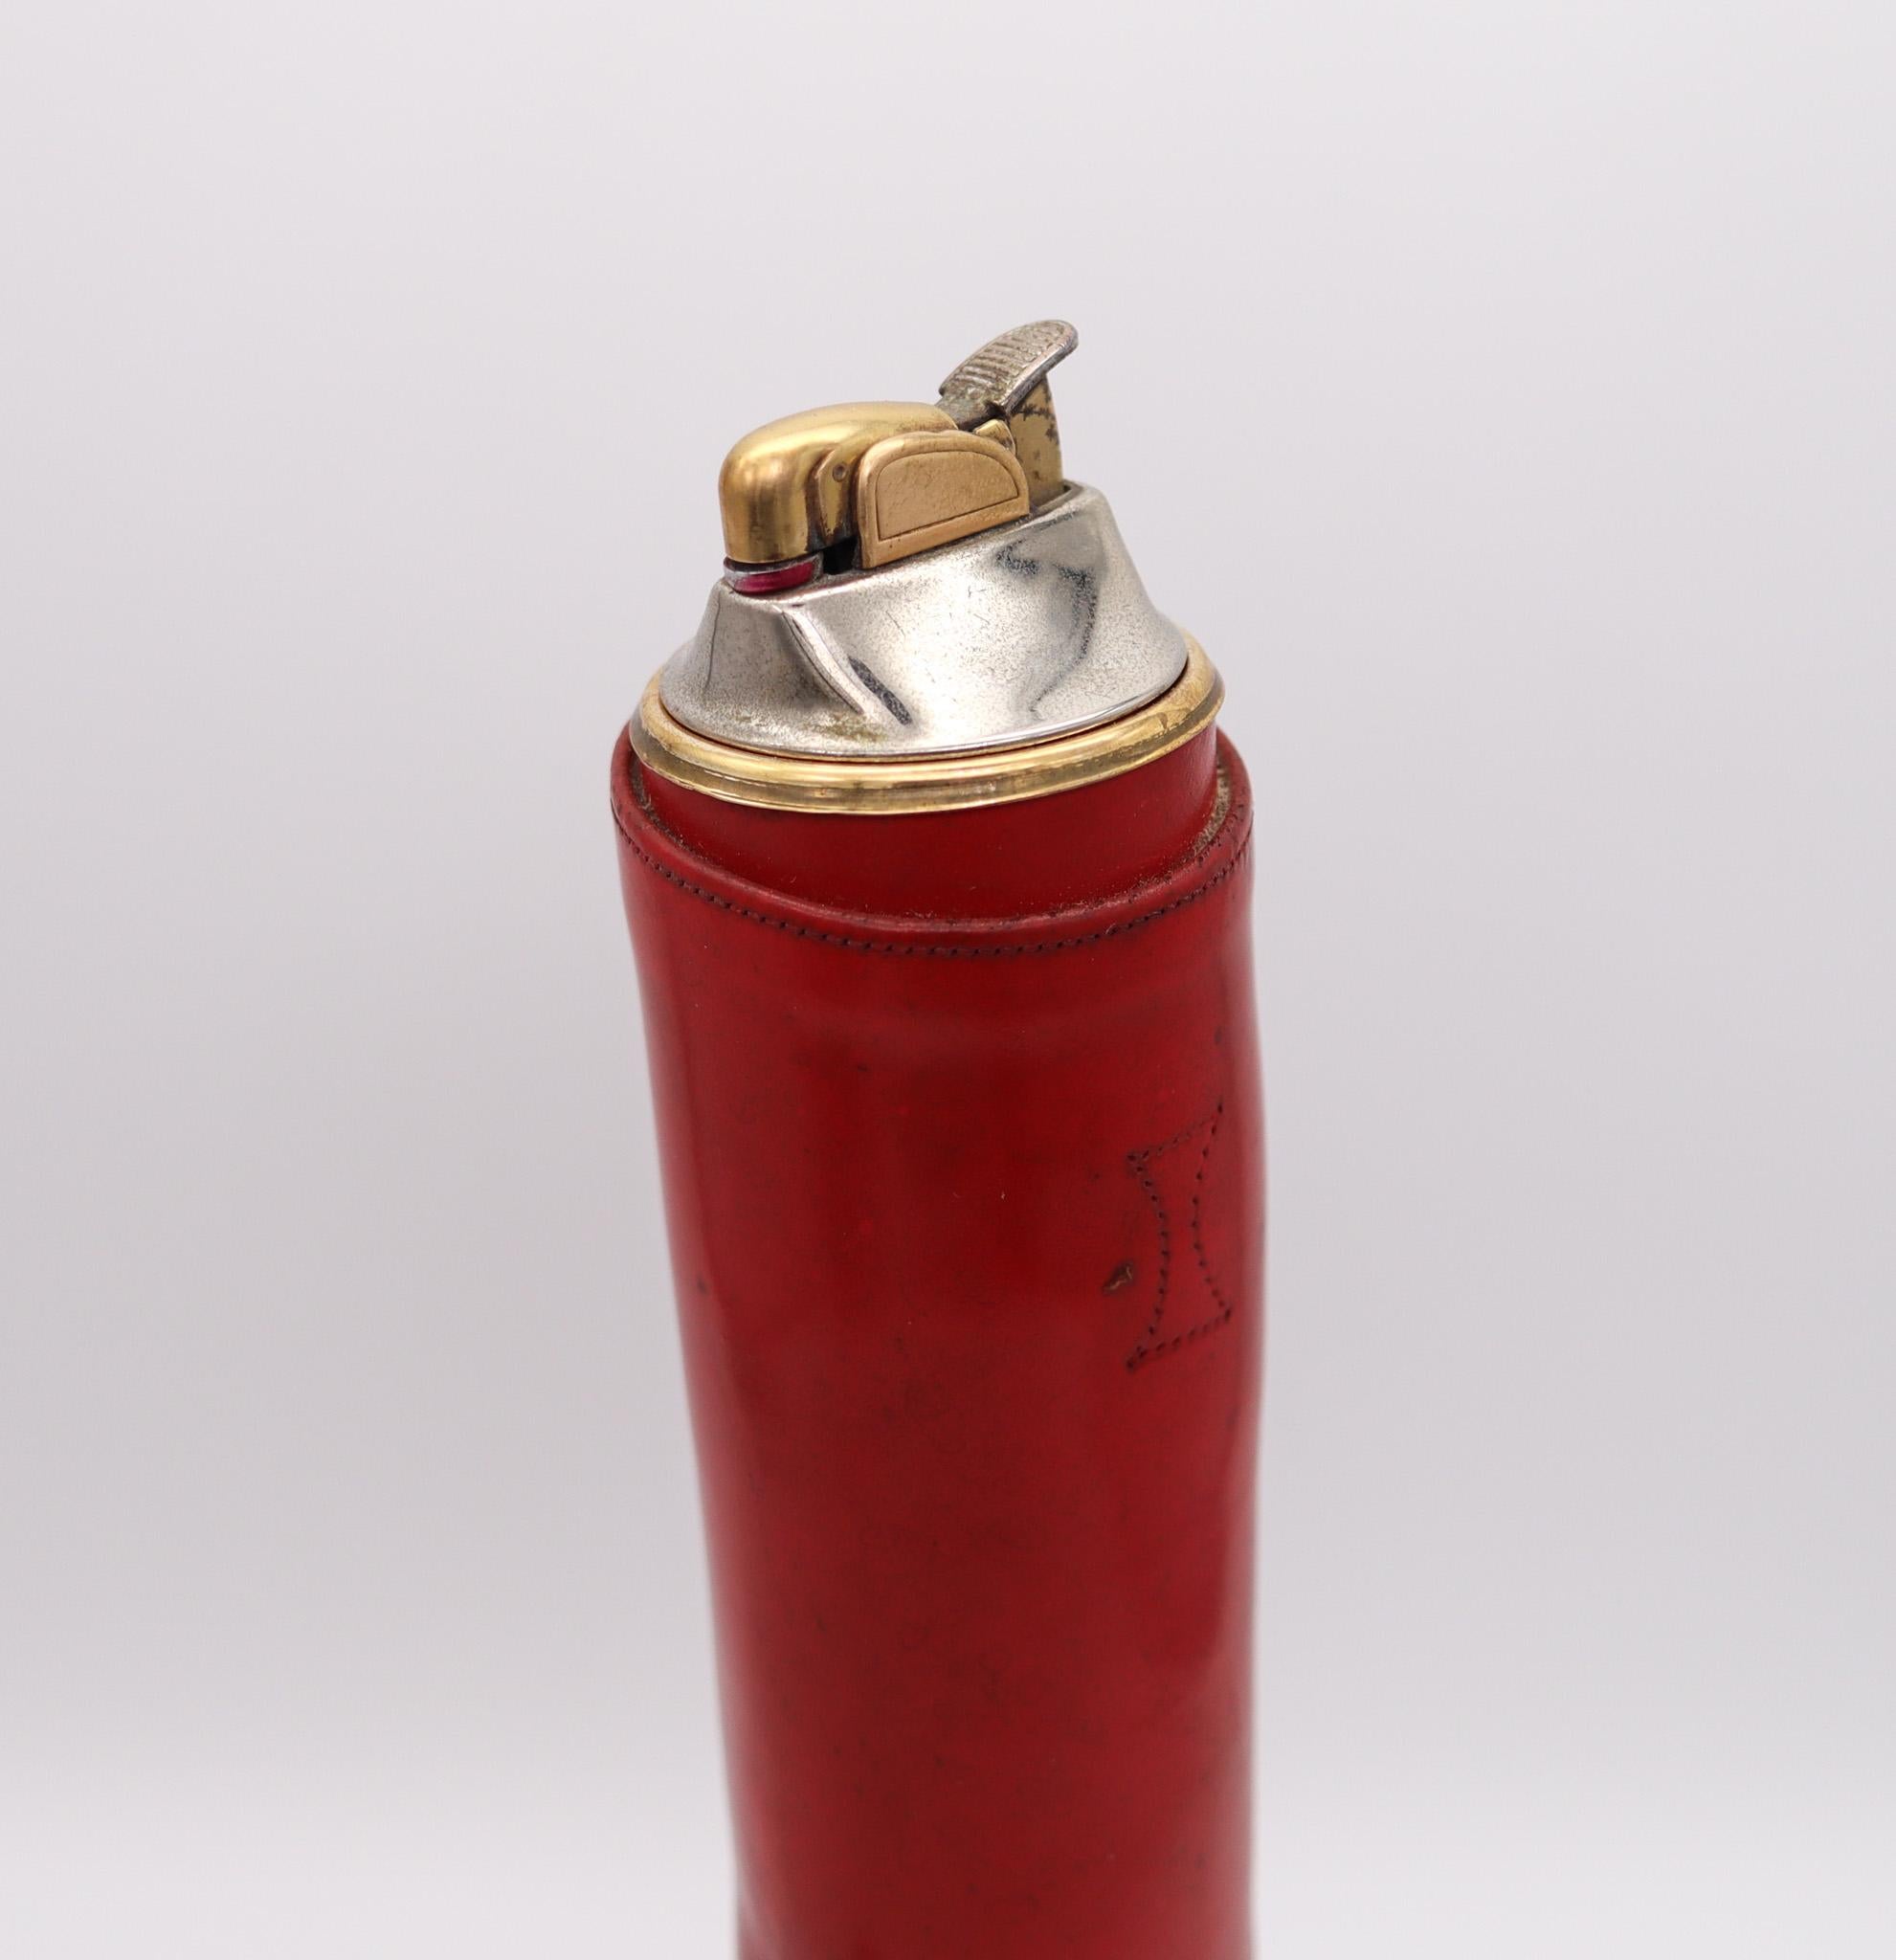 Automatic table lighter designed by Evans.

Stunning automatic lighter, created in America by the Evans Company, back in the 1952. This very handsome piece has been crafted in the shape of a boot, most probably as a promotional item by the Loyal